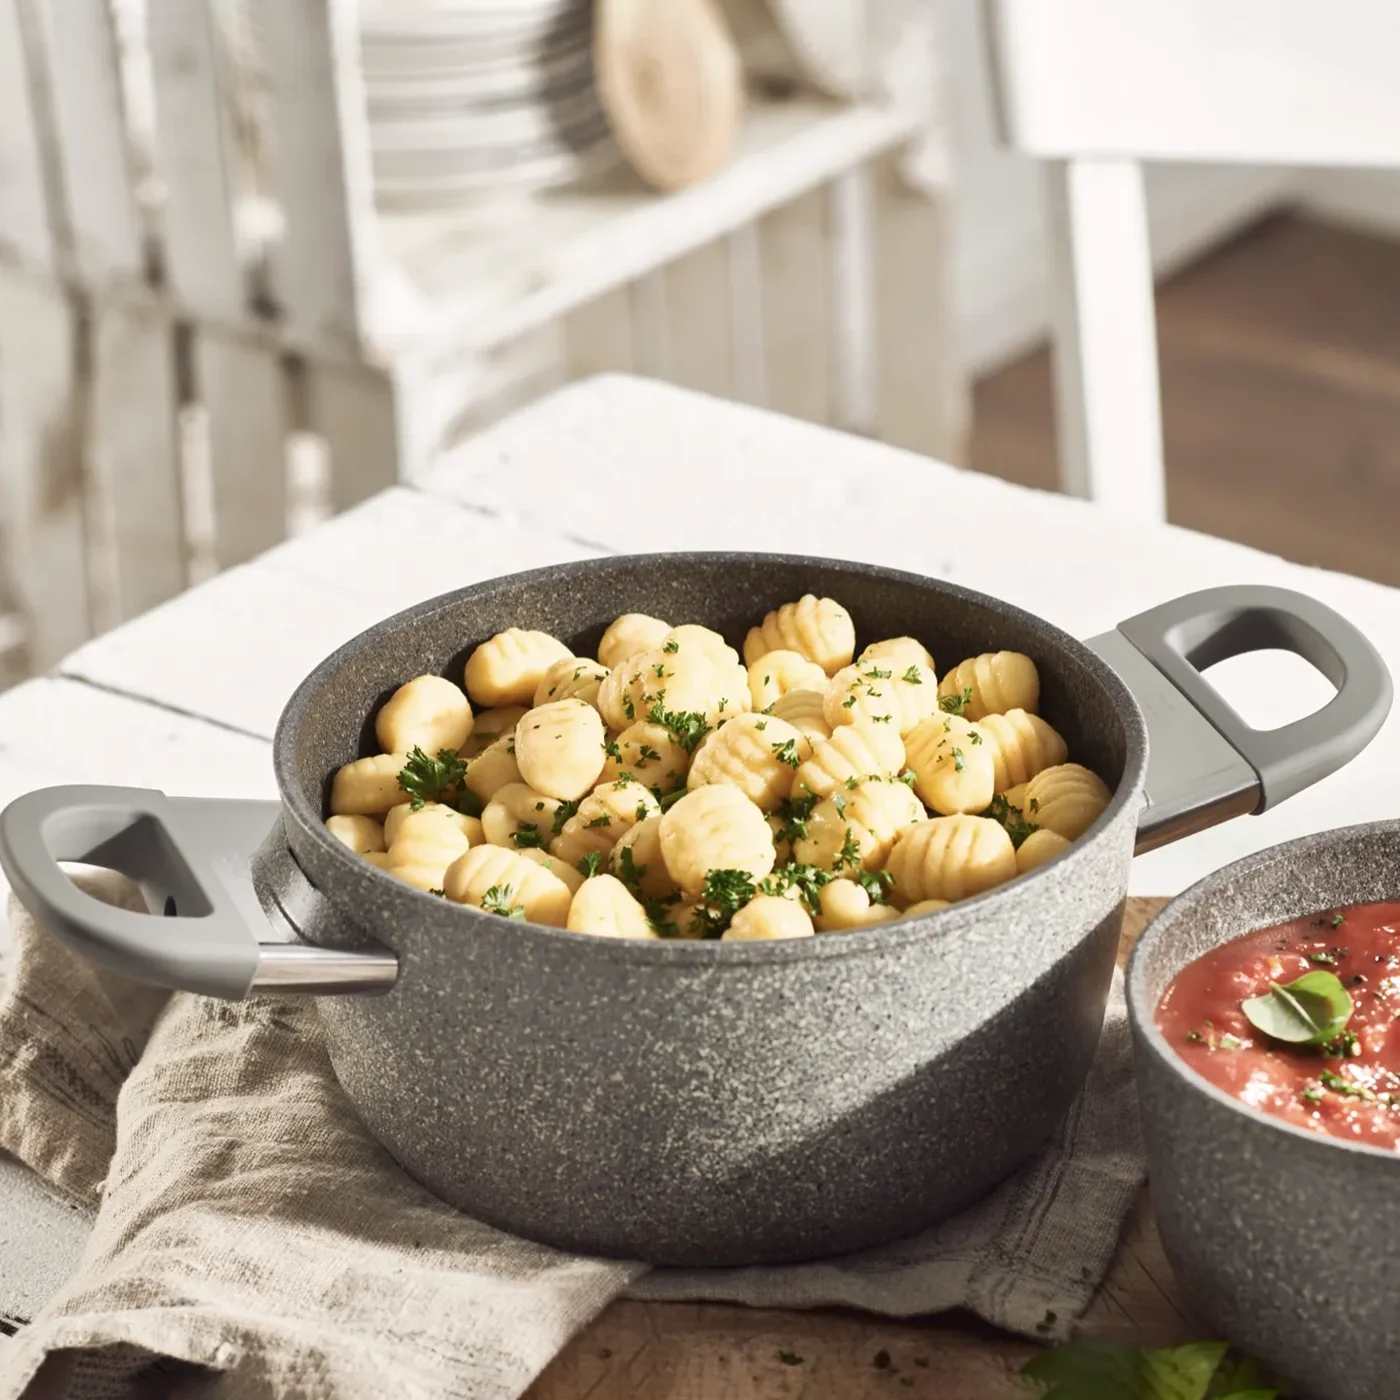 https://www.homethreads.com/files/zwilling/75003-098-0-ballarini-parma-plus-by-henckels-49-qt-aluminum-nonstick-dutch-oven-with-lid-made-in-italy-4.webp